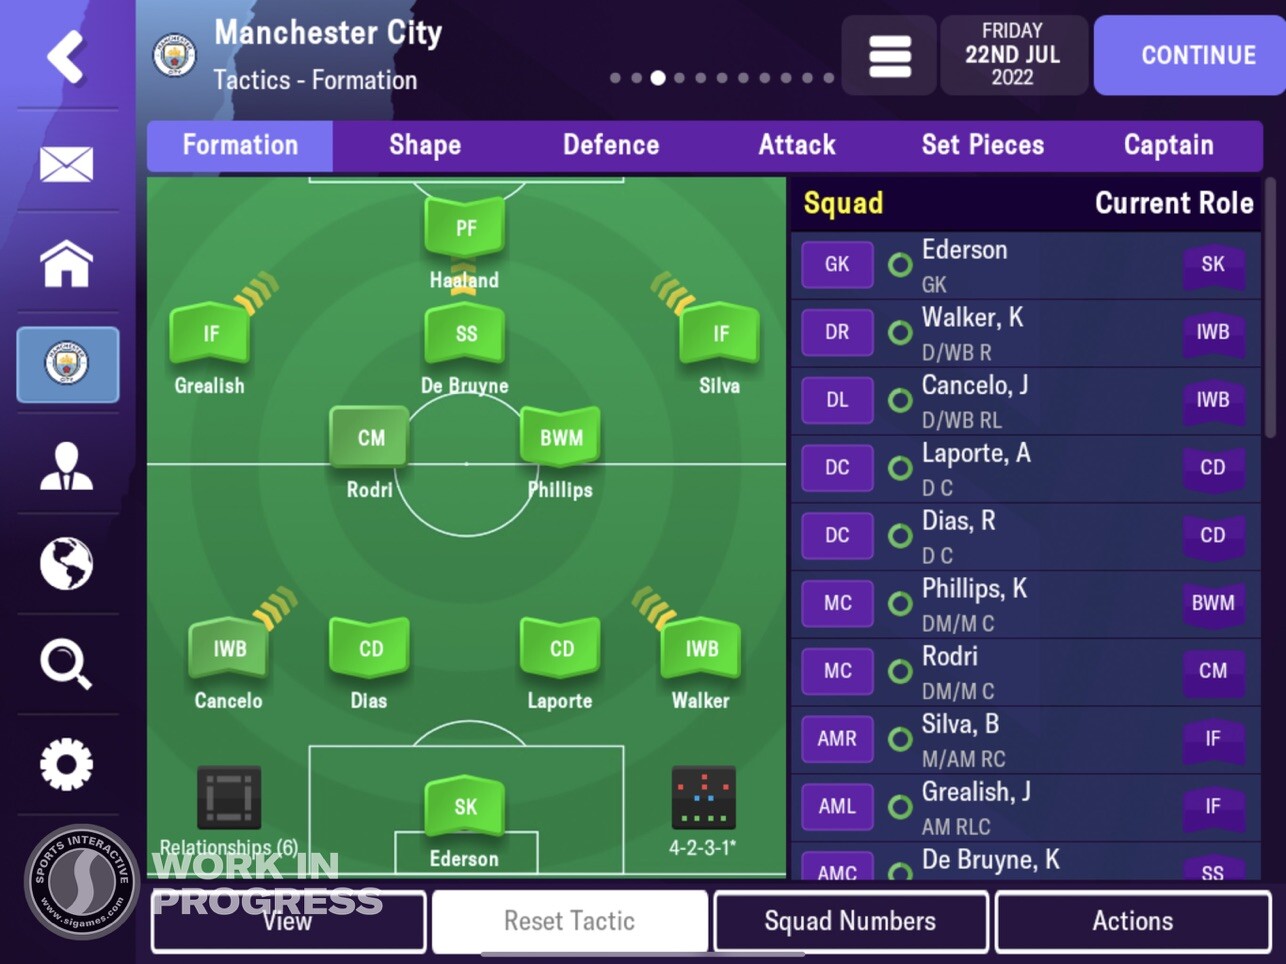 Best Free Agent Players? - Football Manager 2024 Mobile - FMM Vibe